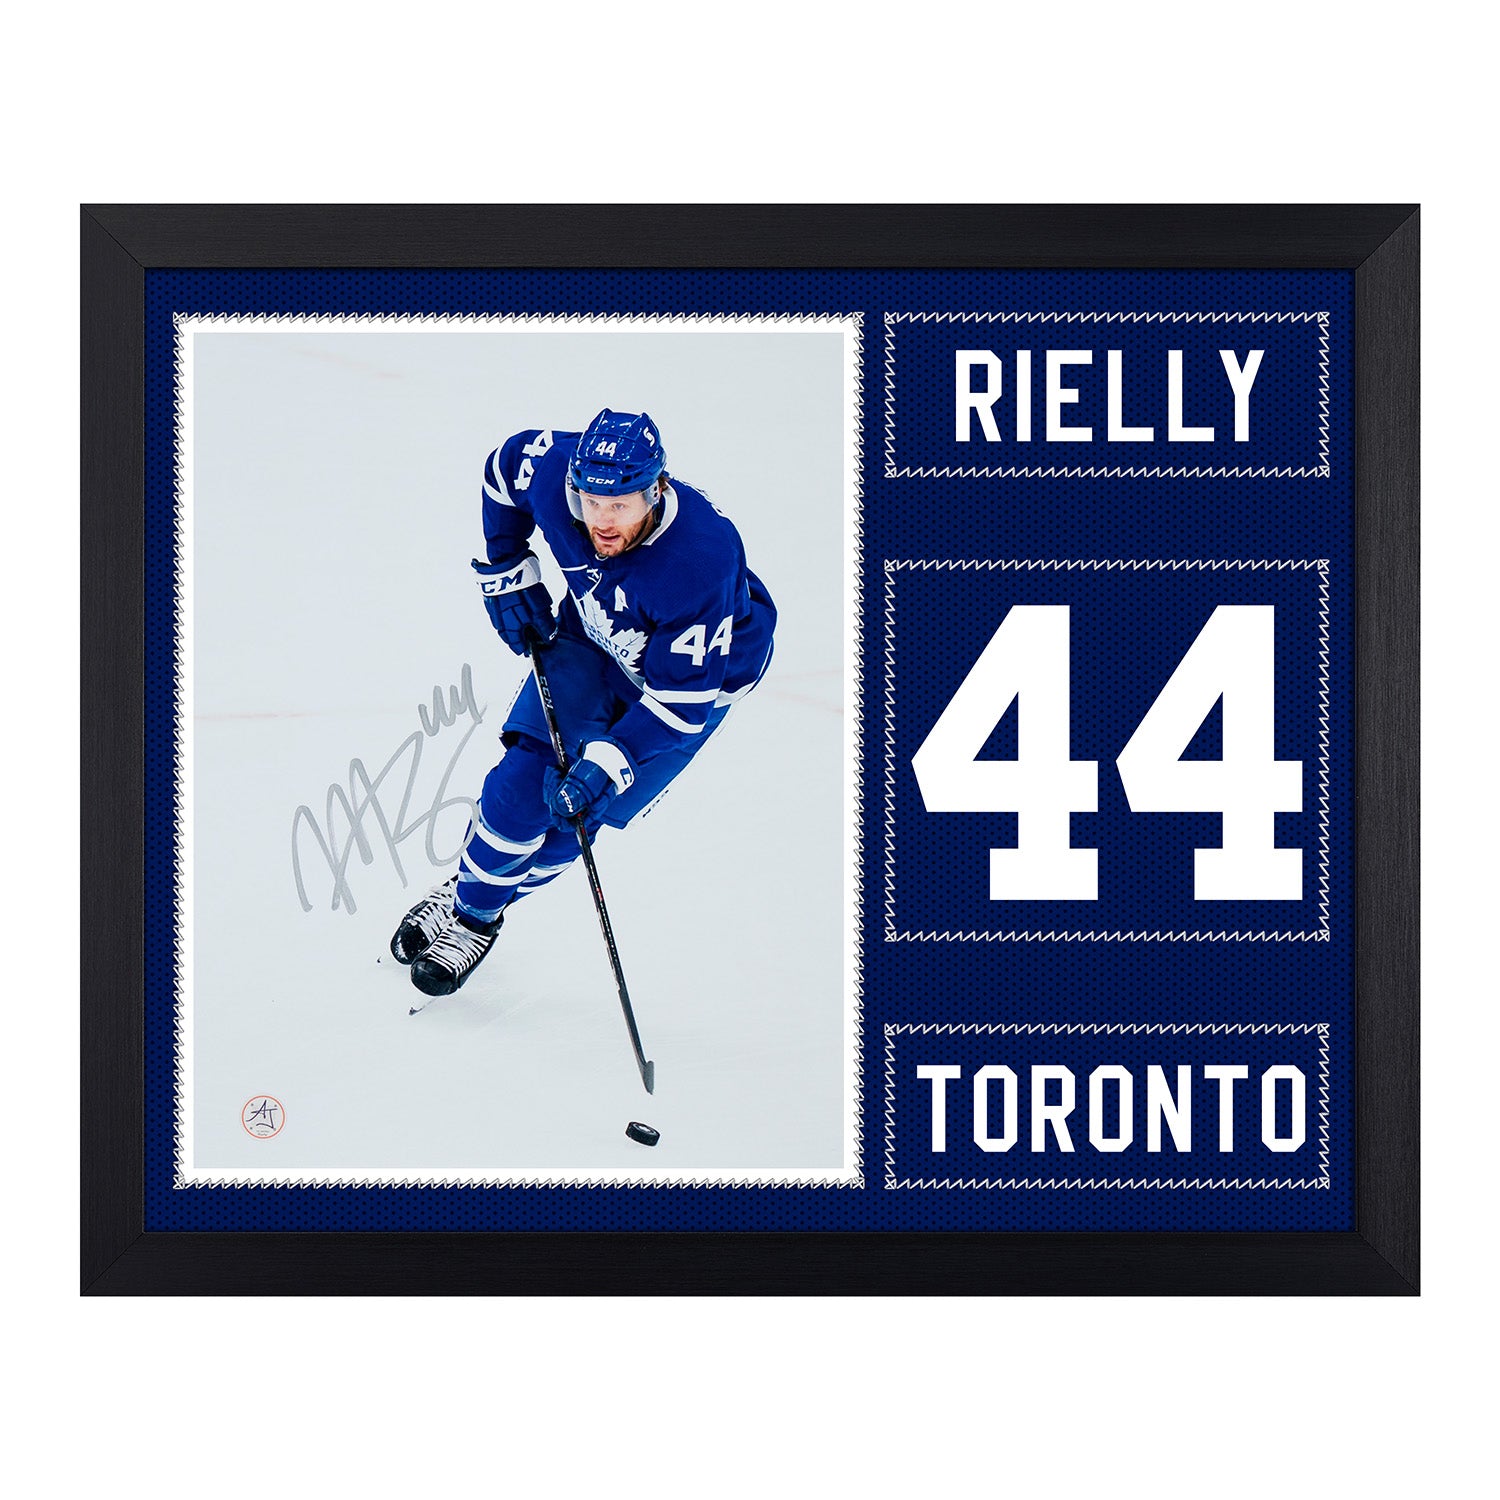 Morgan Rielly Autographed Toronto Maple Leafs Uniform Graphic 19x23 Frame